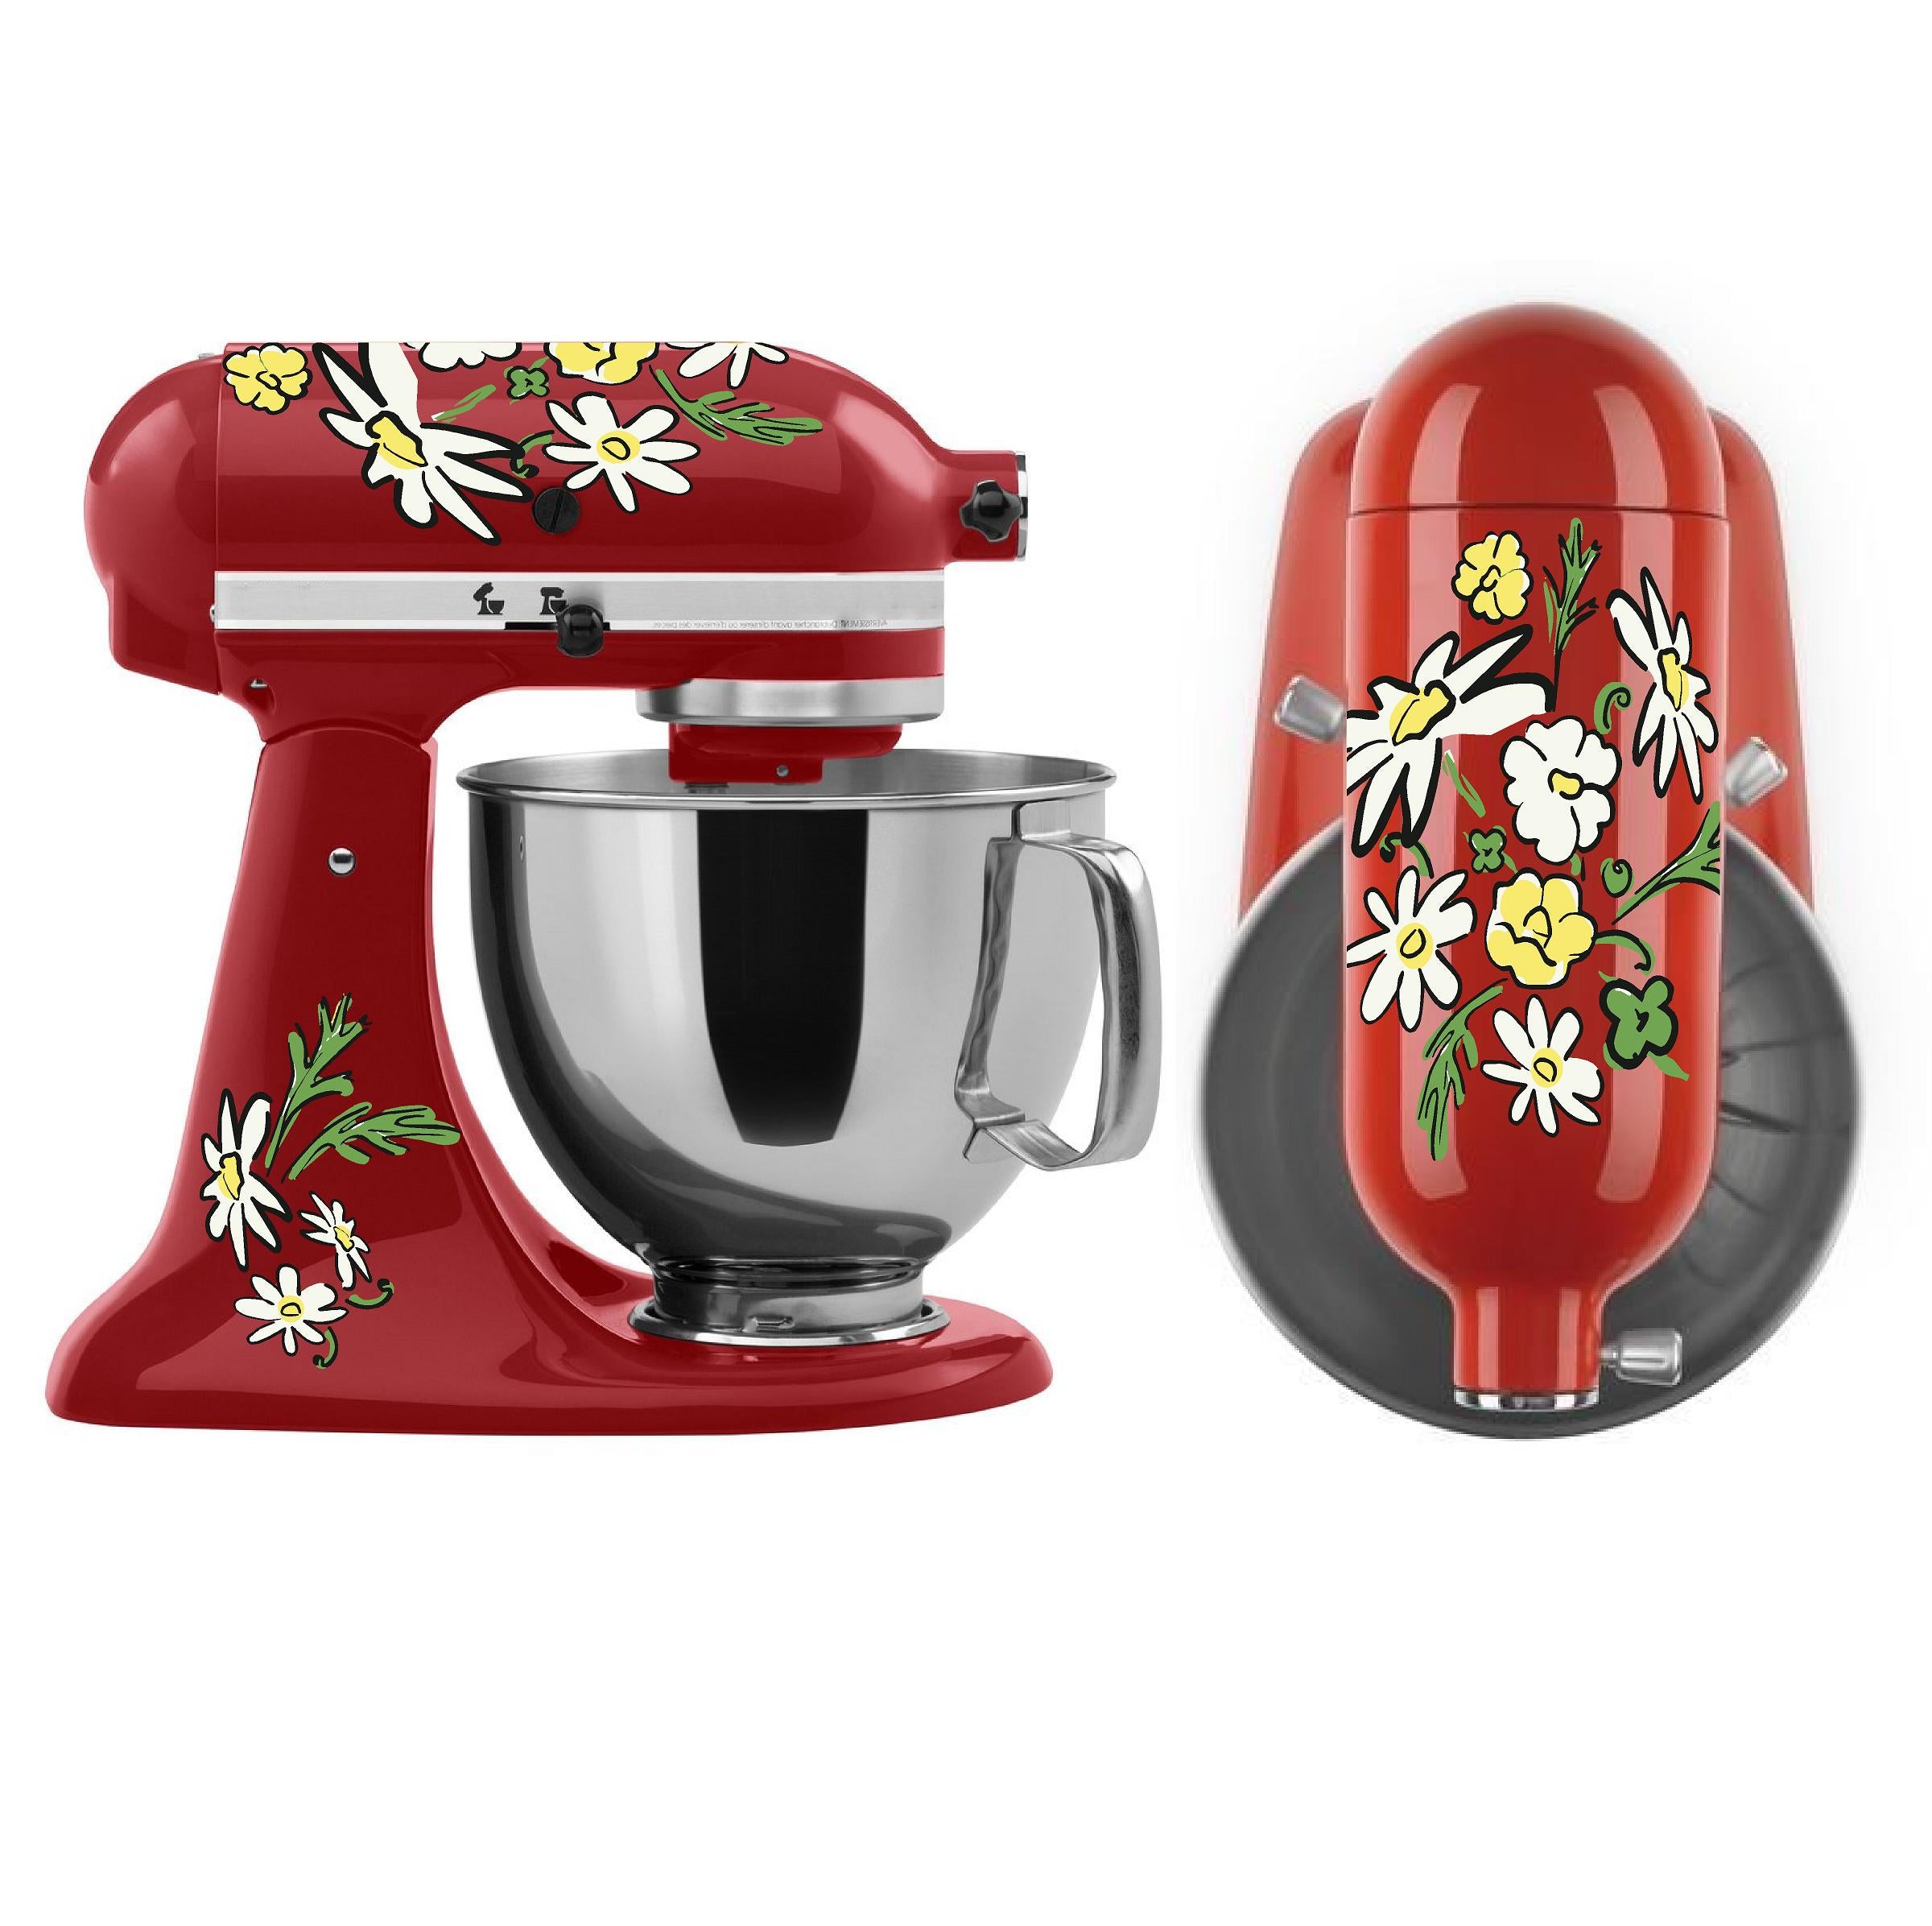 Red, Cream, Turquoise Floral Mixer Decals Featured in Pioneer